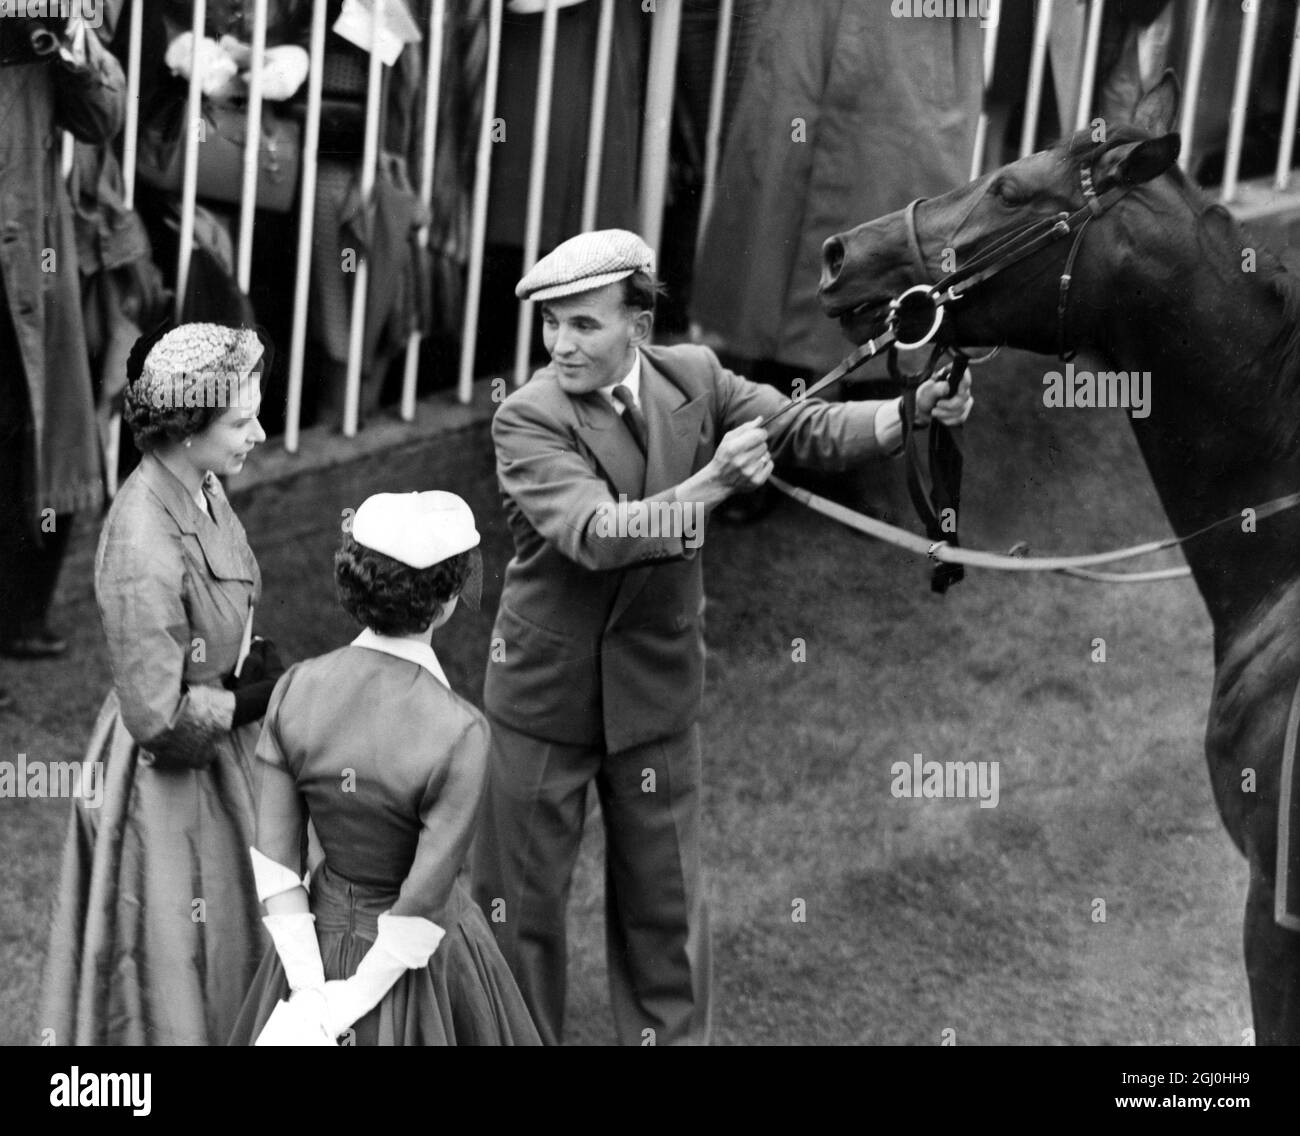 Choir Boy the 4 year old colt has won the Royal Hunt Cup for the Queen Elizabeth II with Princess Margaret and stable boy Geoffrey Woodward June 1953 Stock Photo